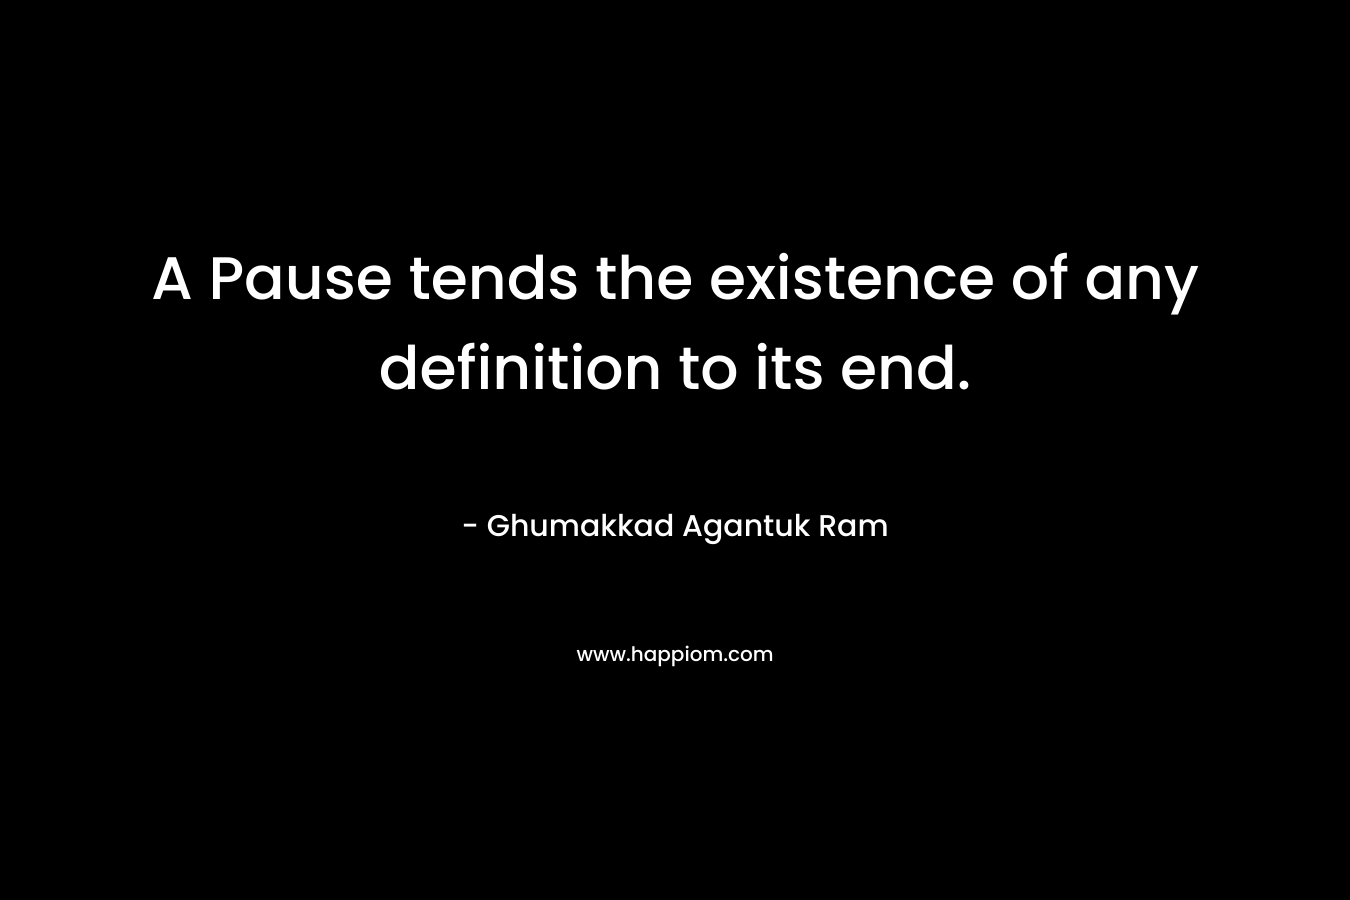 A Pause tends the existence of any definition to its end. – Ghumakkad Agantuk Ram